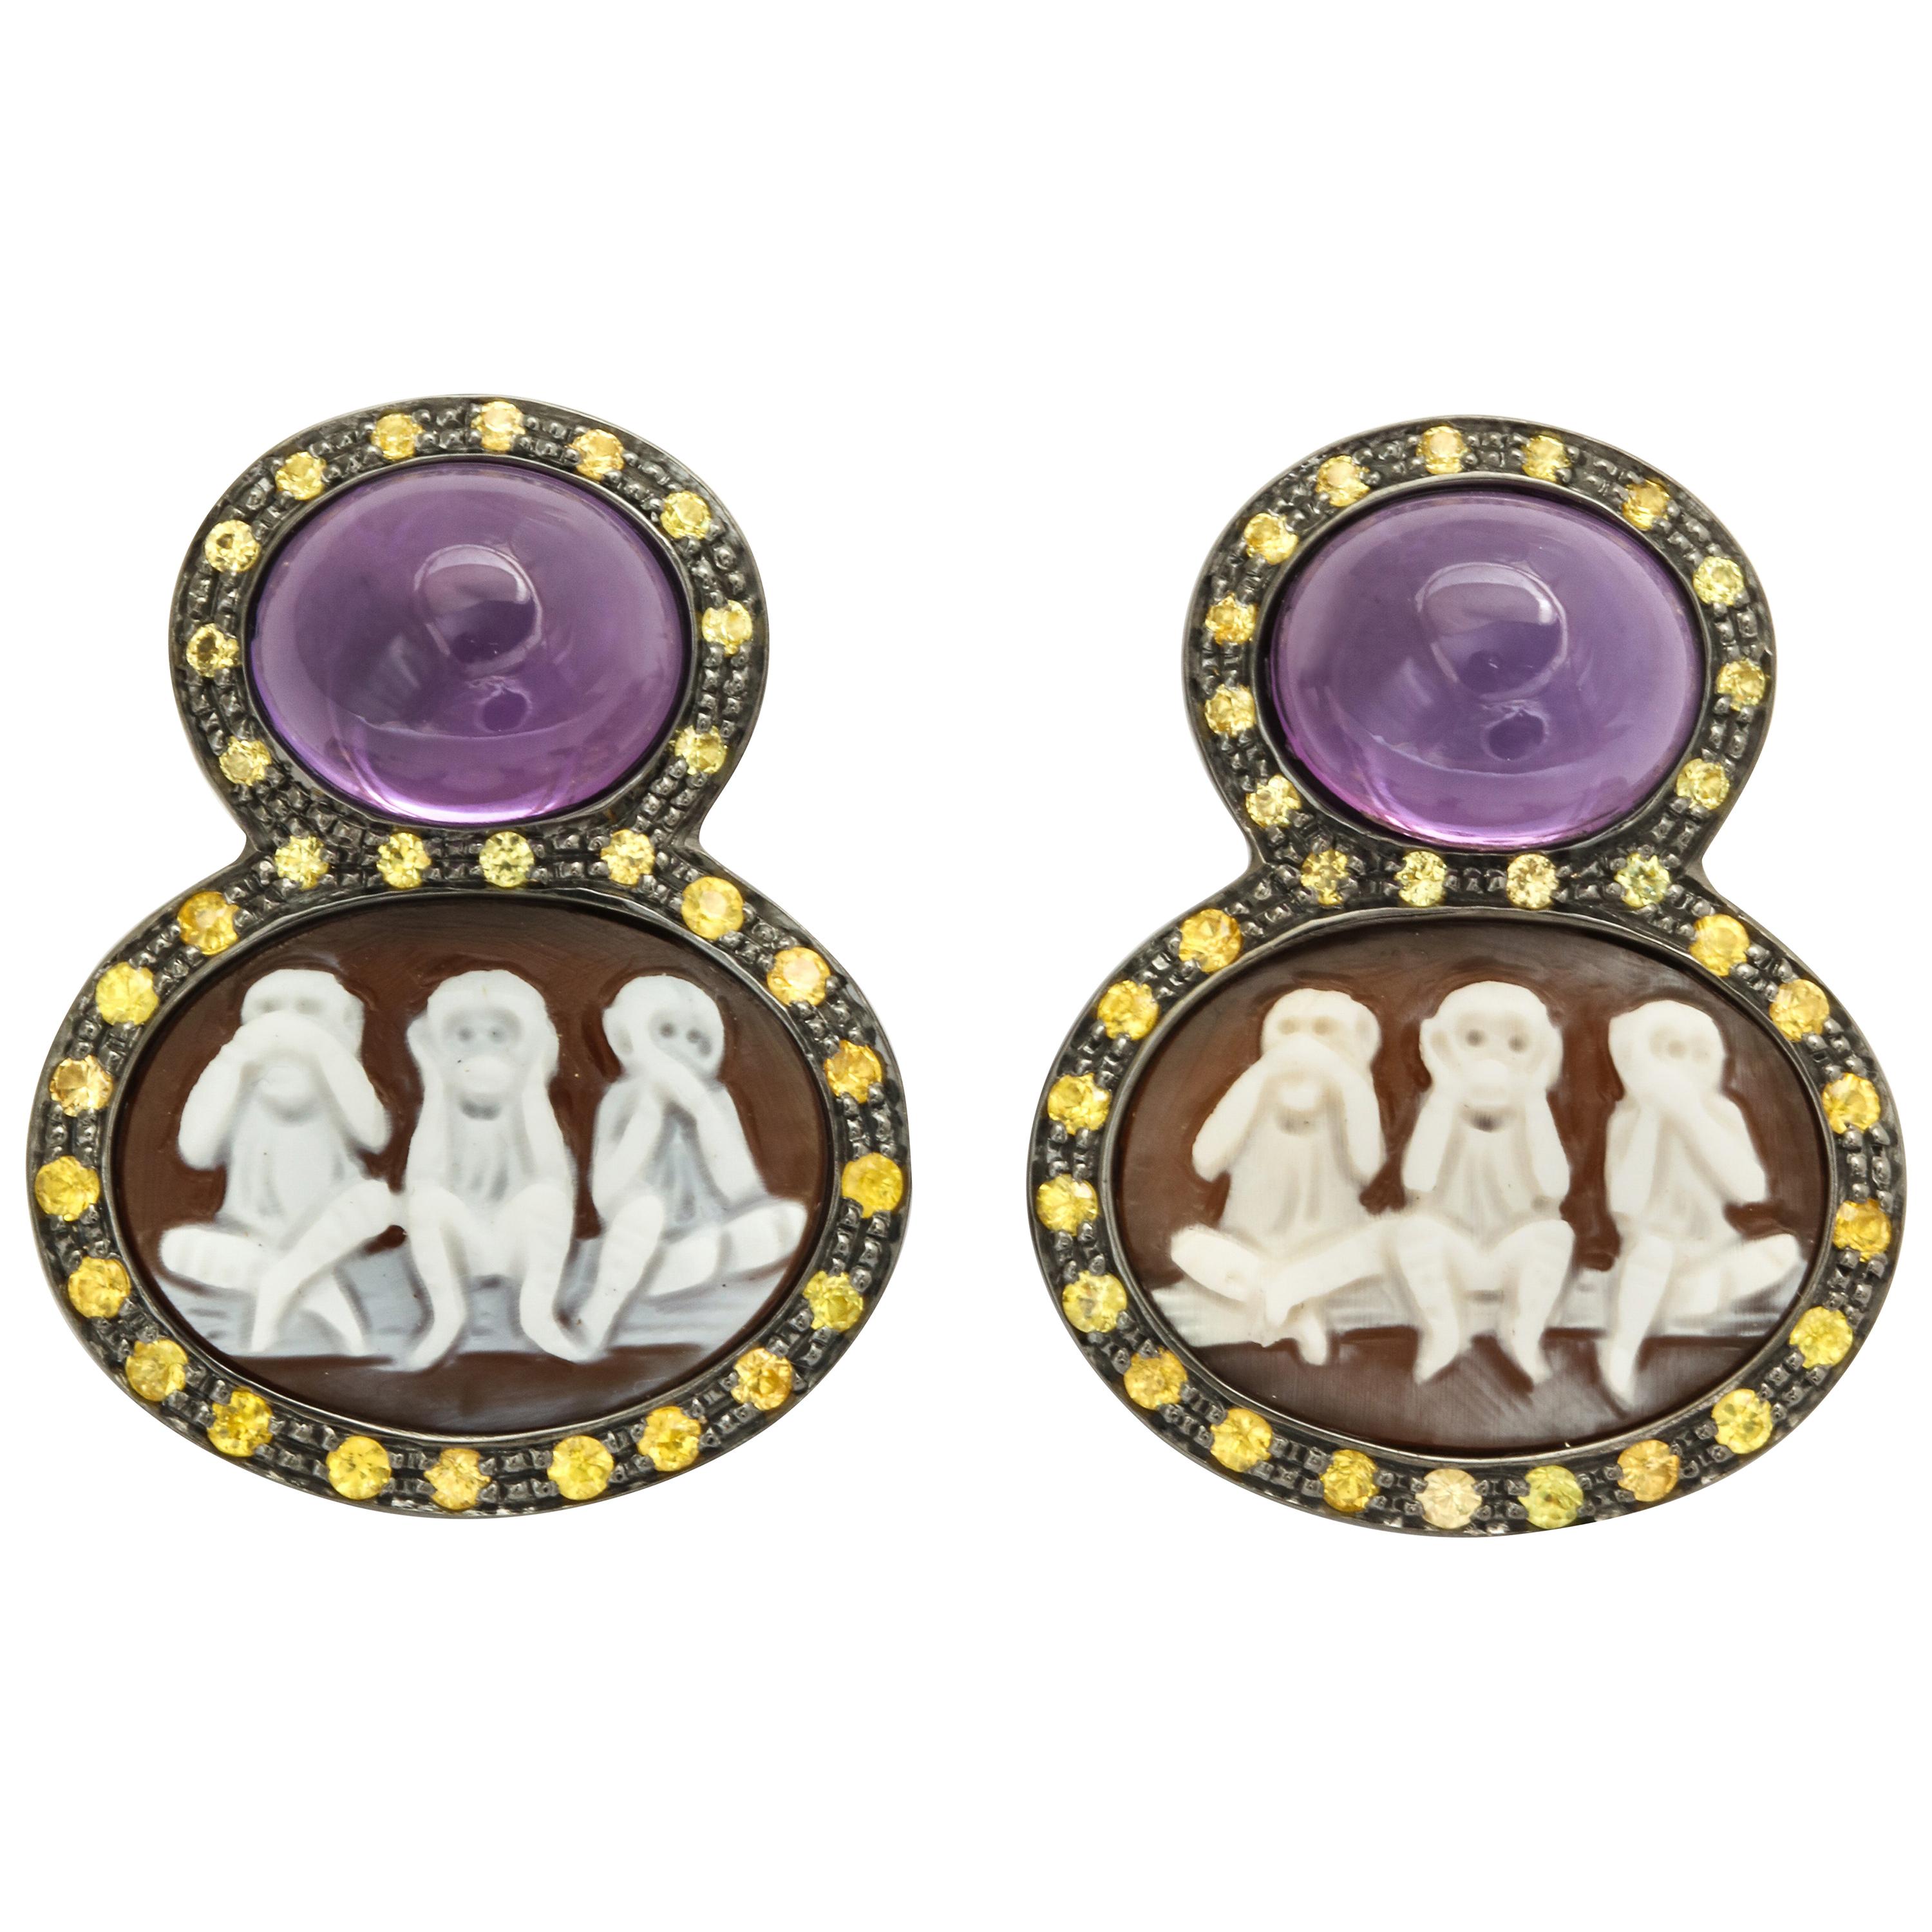 Amedeo Couture "Scimmiette" Cameo Earrings with Amethyst and Sapphires For Sale